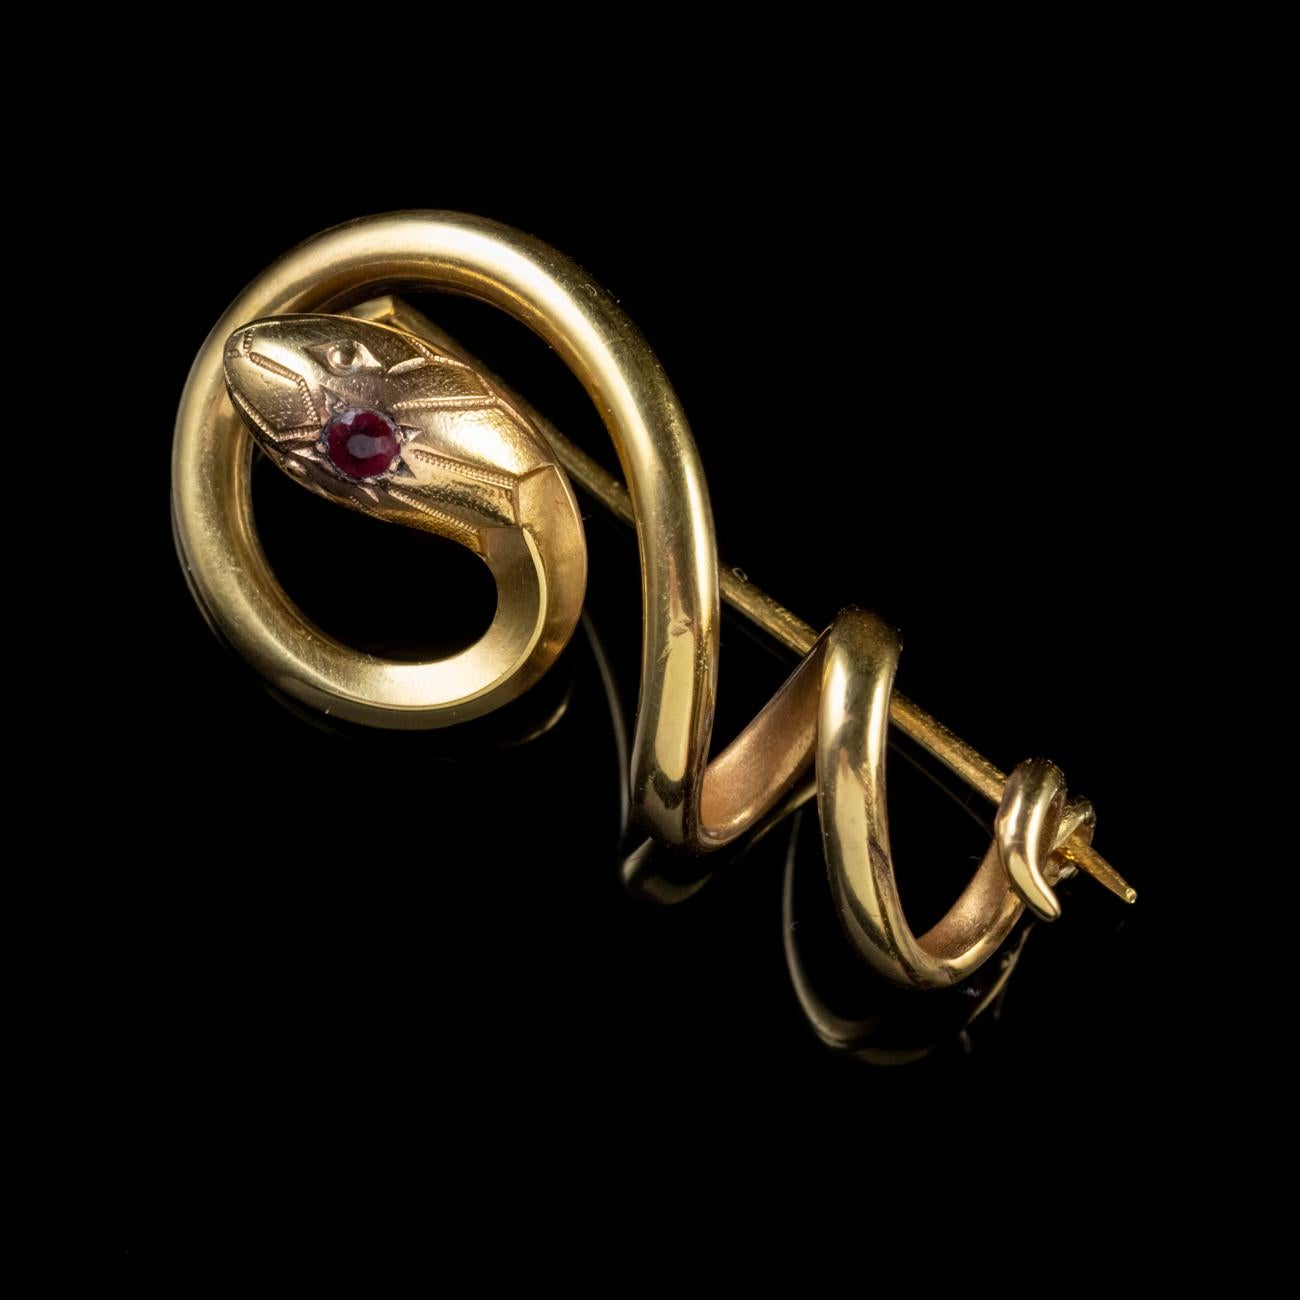 This beautiful Antique Art Nouveau French brooch is modelled in the shape of a coiled serpent. It features intricate detailing on the head with a gorgeous Garnet inset, weighing approx. 0.75ct.

The brooch features the mark TITRE FIXE. ‘Fixe’ is the